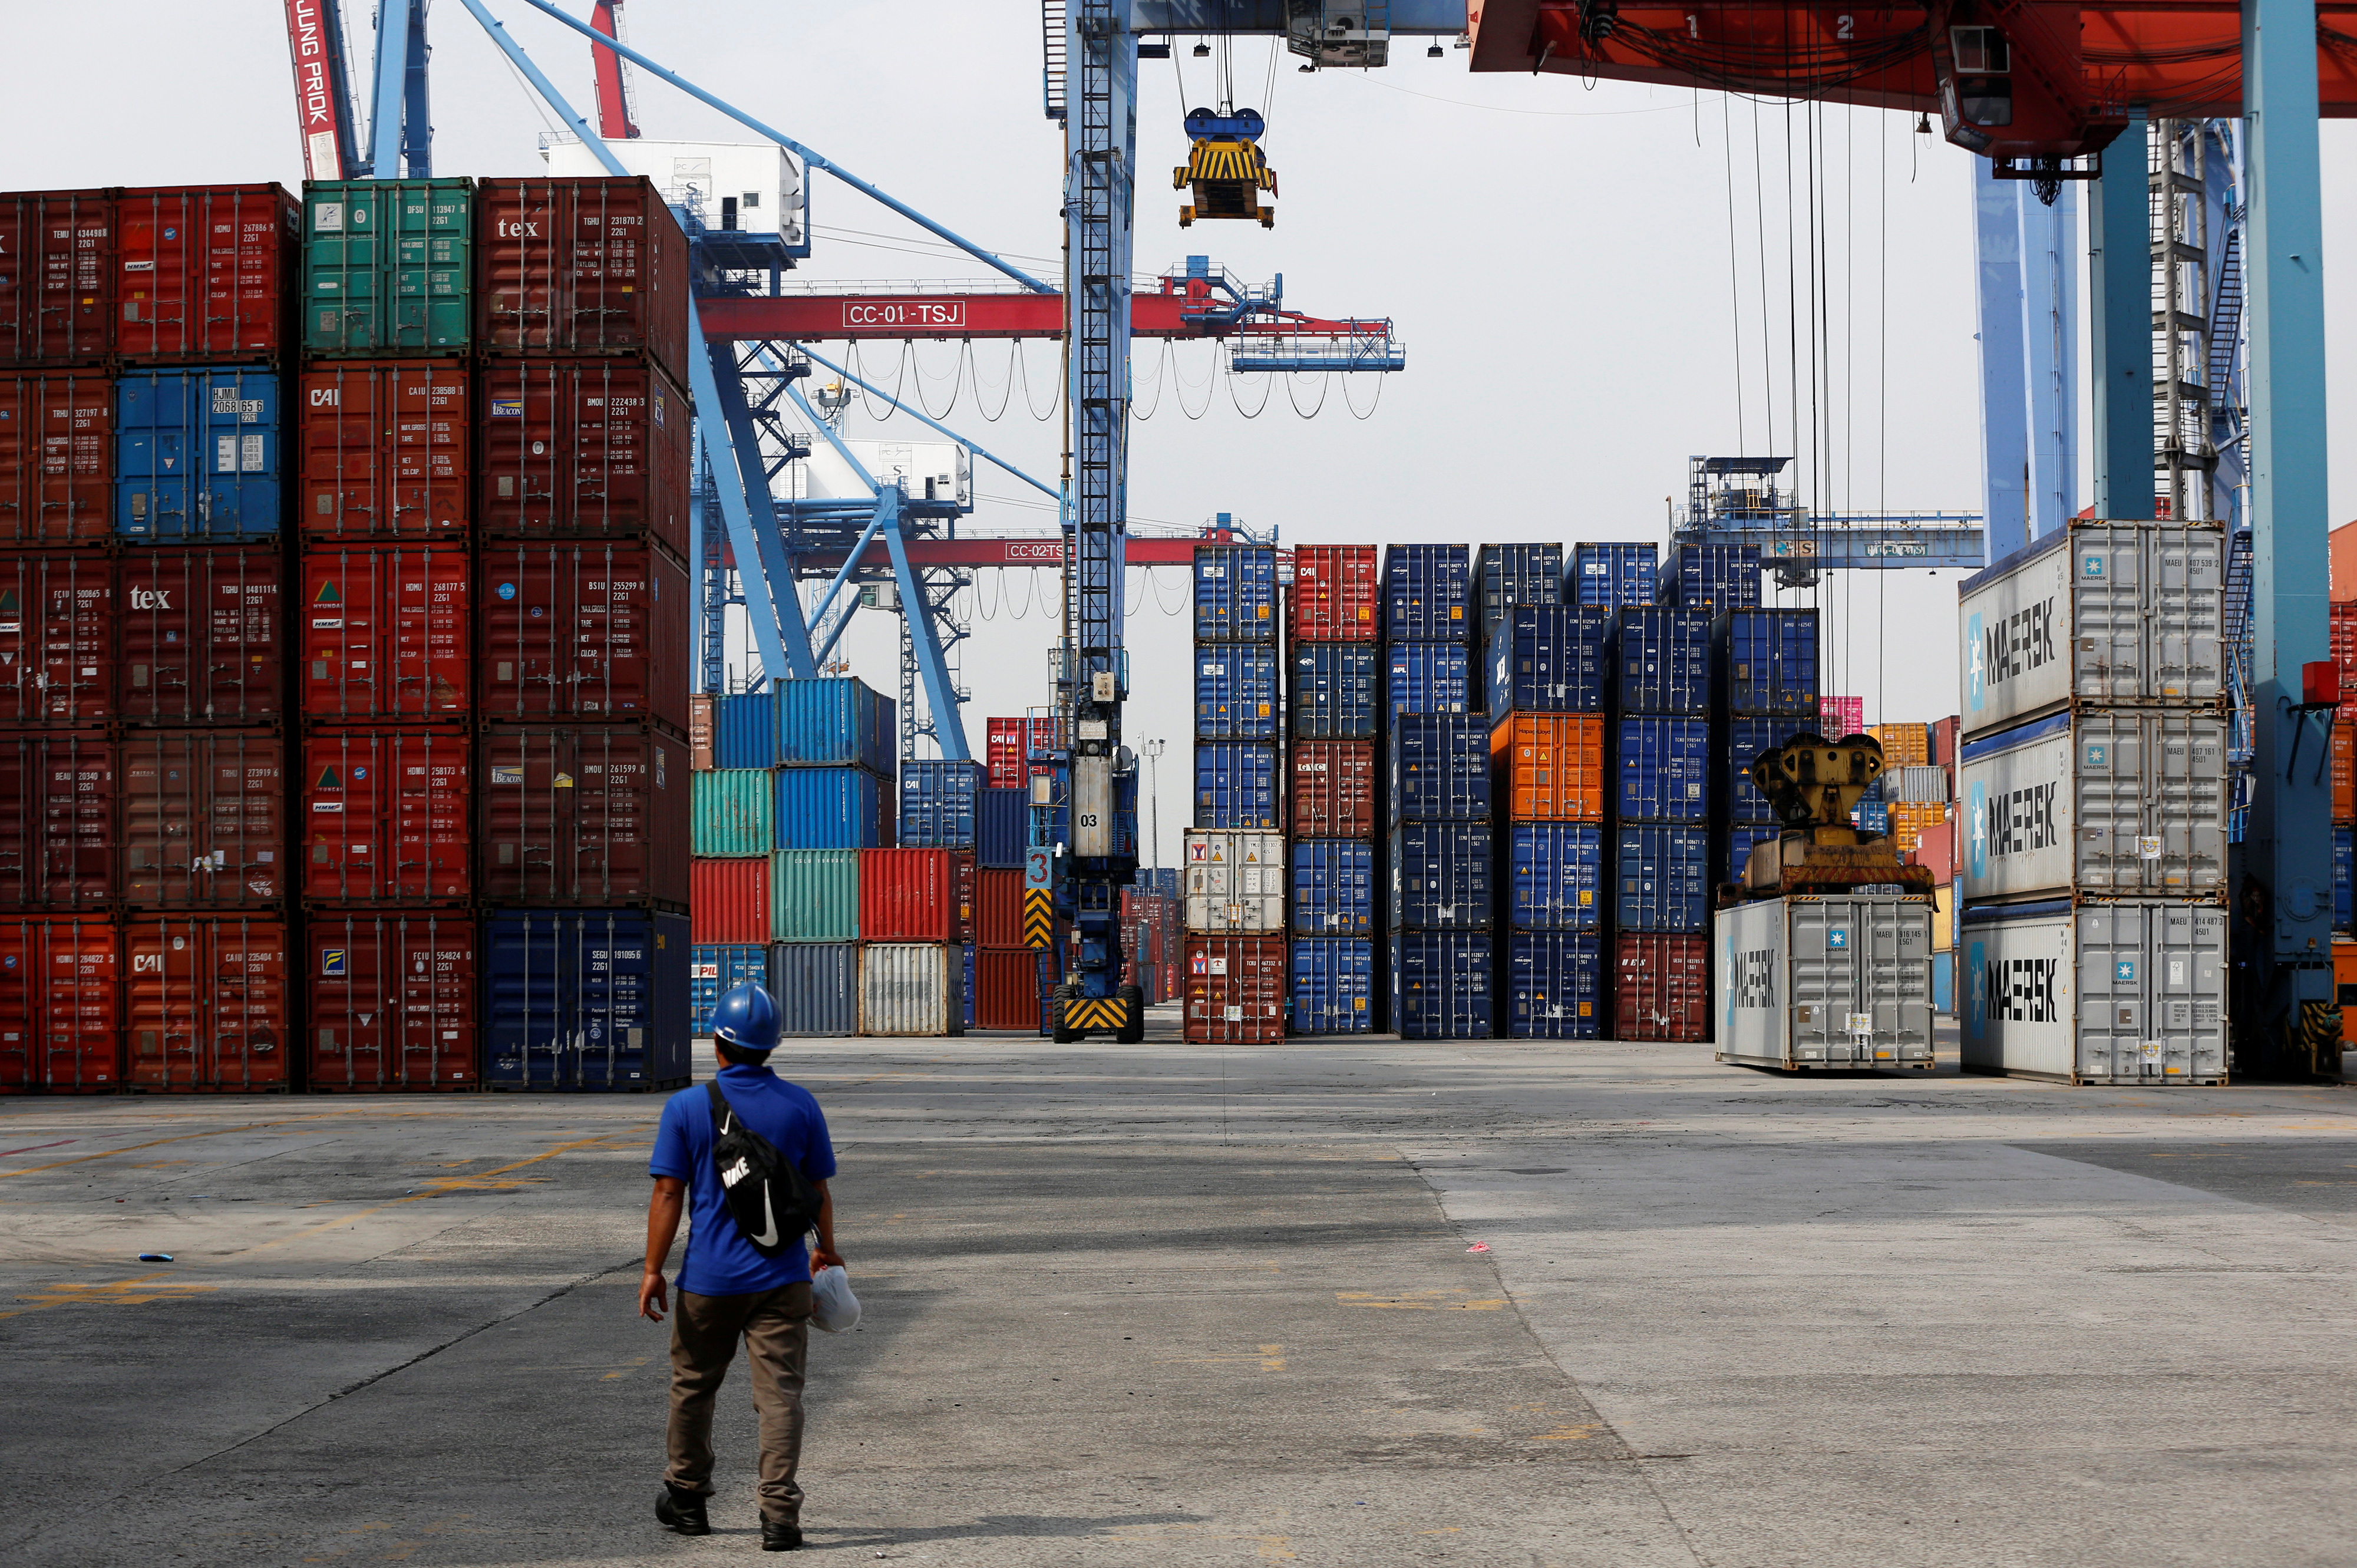 A worker walks on the dock of the Tanjung Priok Port in Jakarta